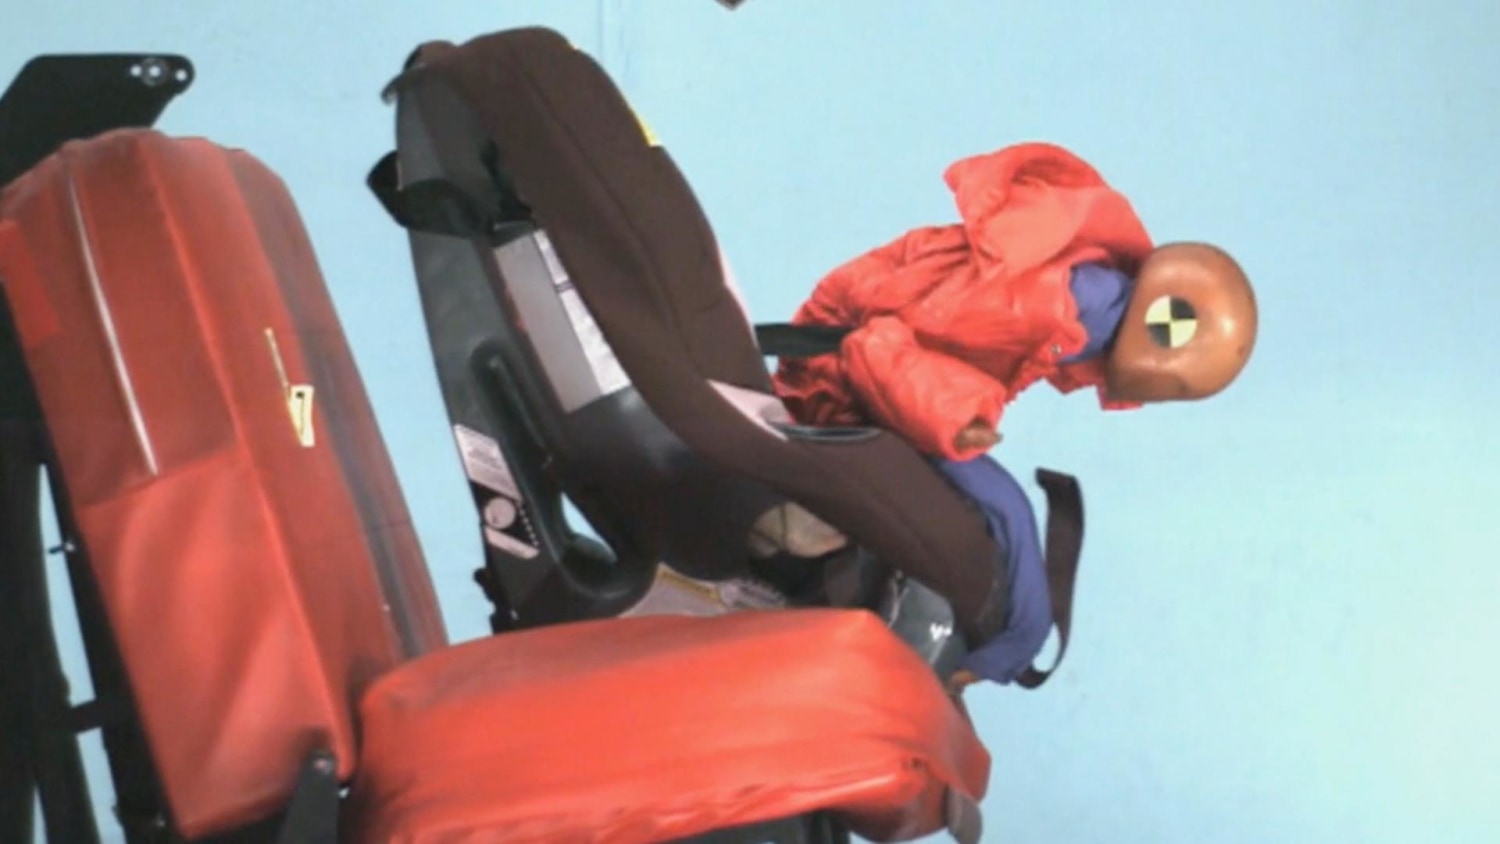 Winter coat and car seat danger: How to keep your child safe